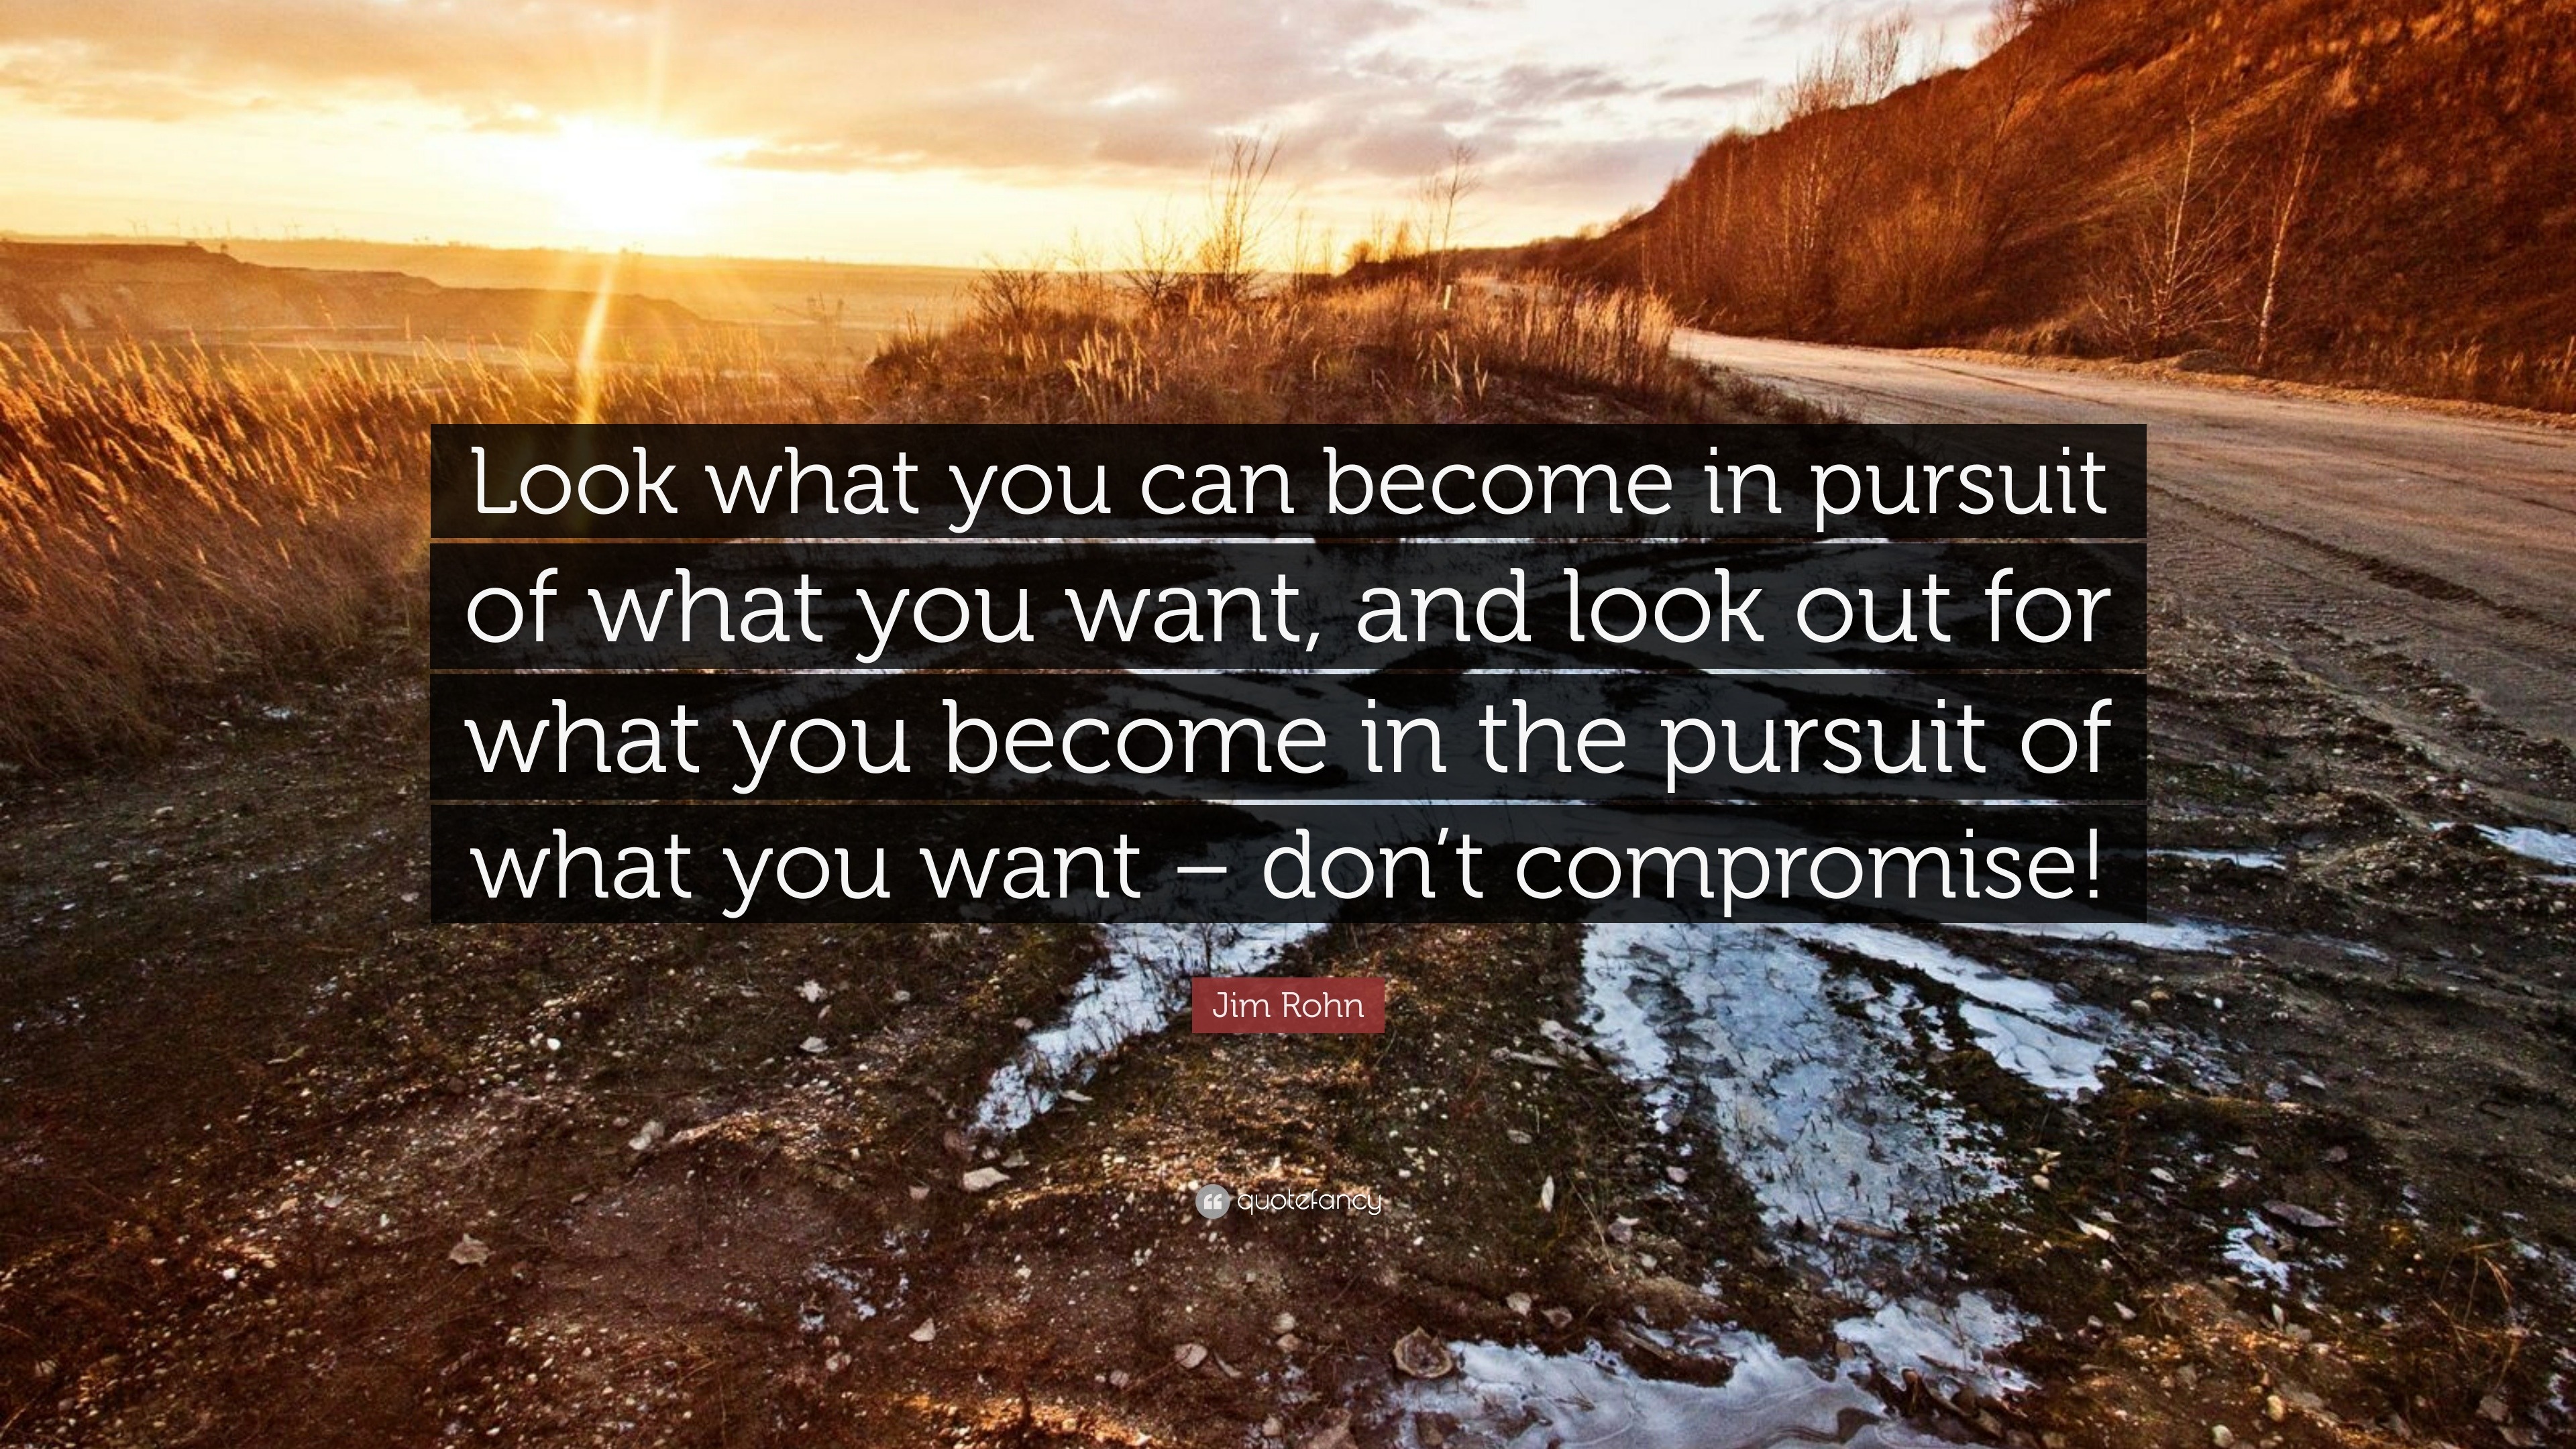 Jim Rohn Quote: “Look what you can become in pursuit of what you want ...